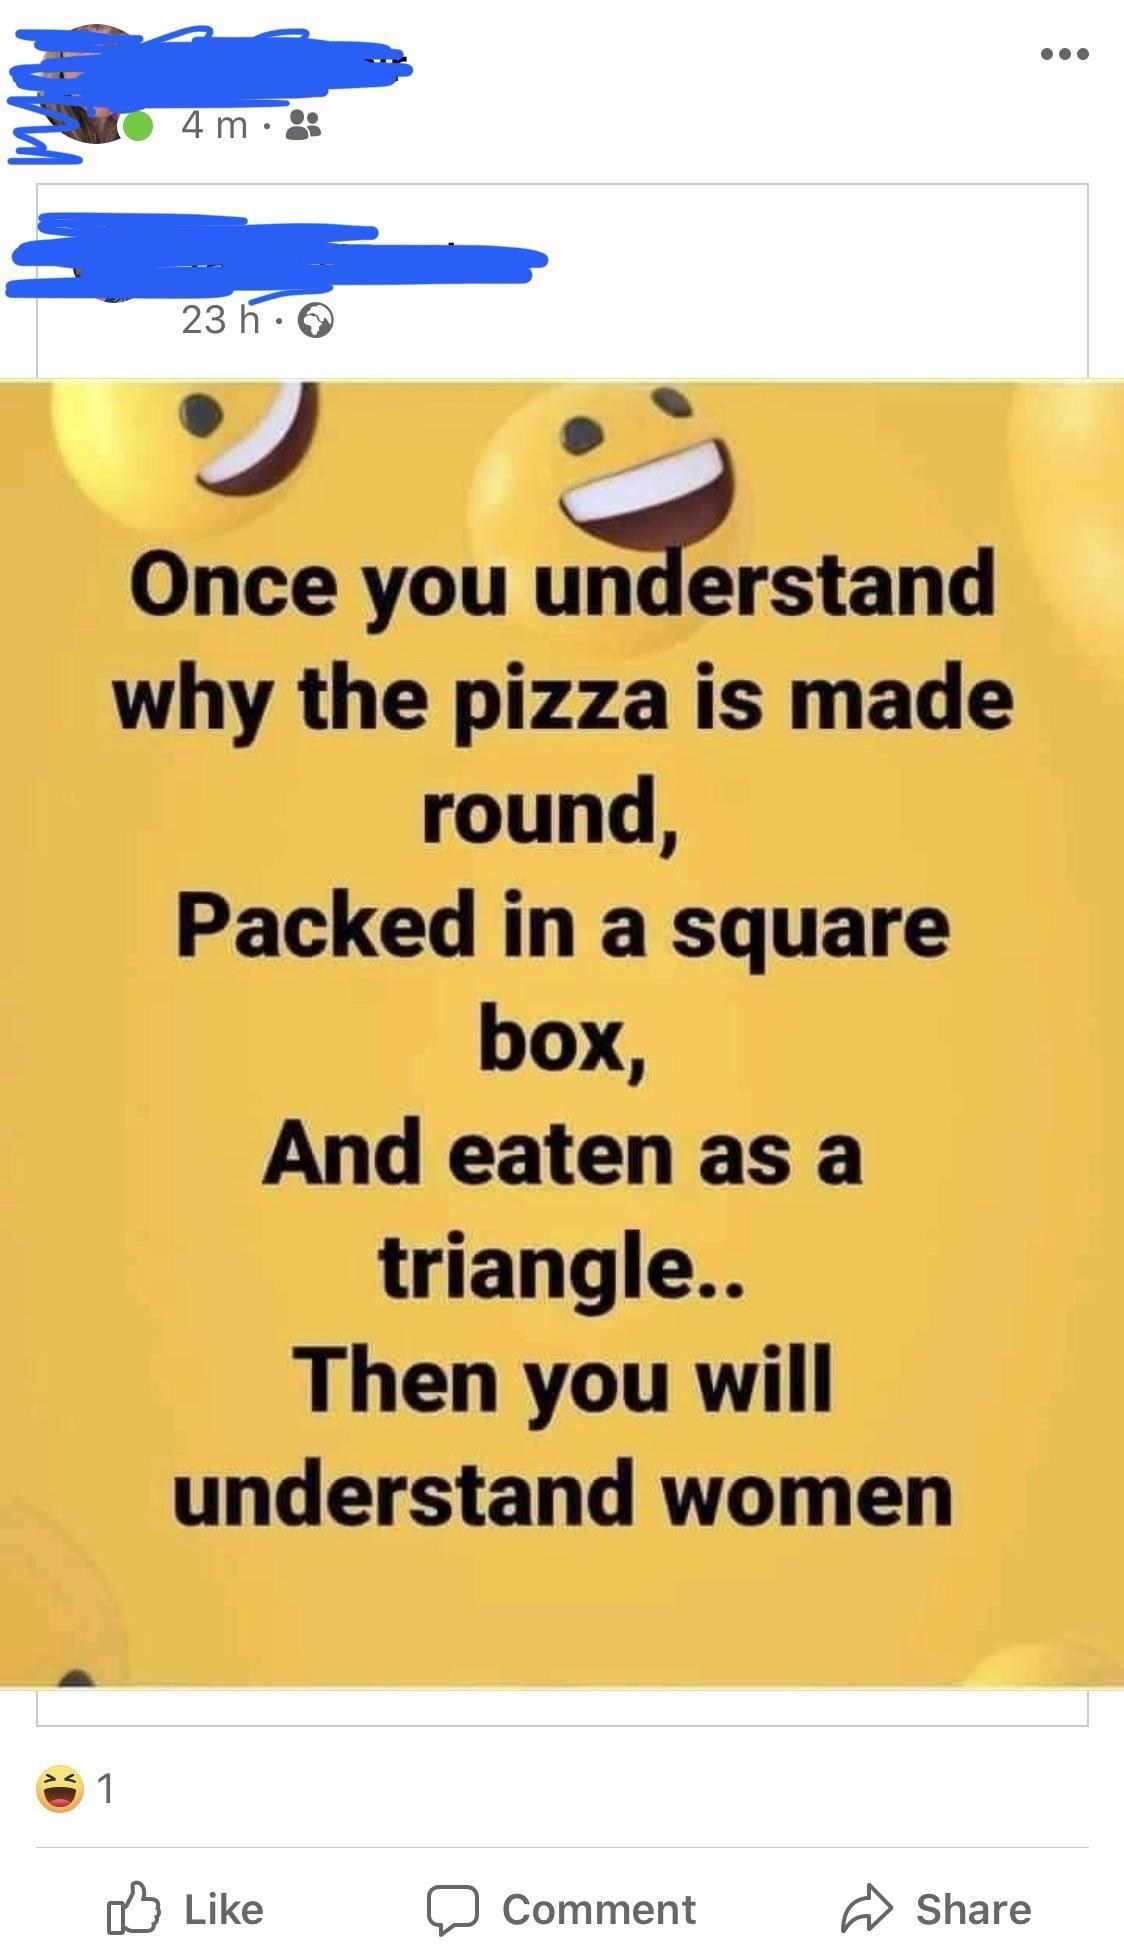 A joke that says you&#x27;ll only understand women when you understand why pizza is round but cut into triangles and put in a square box